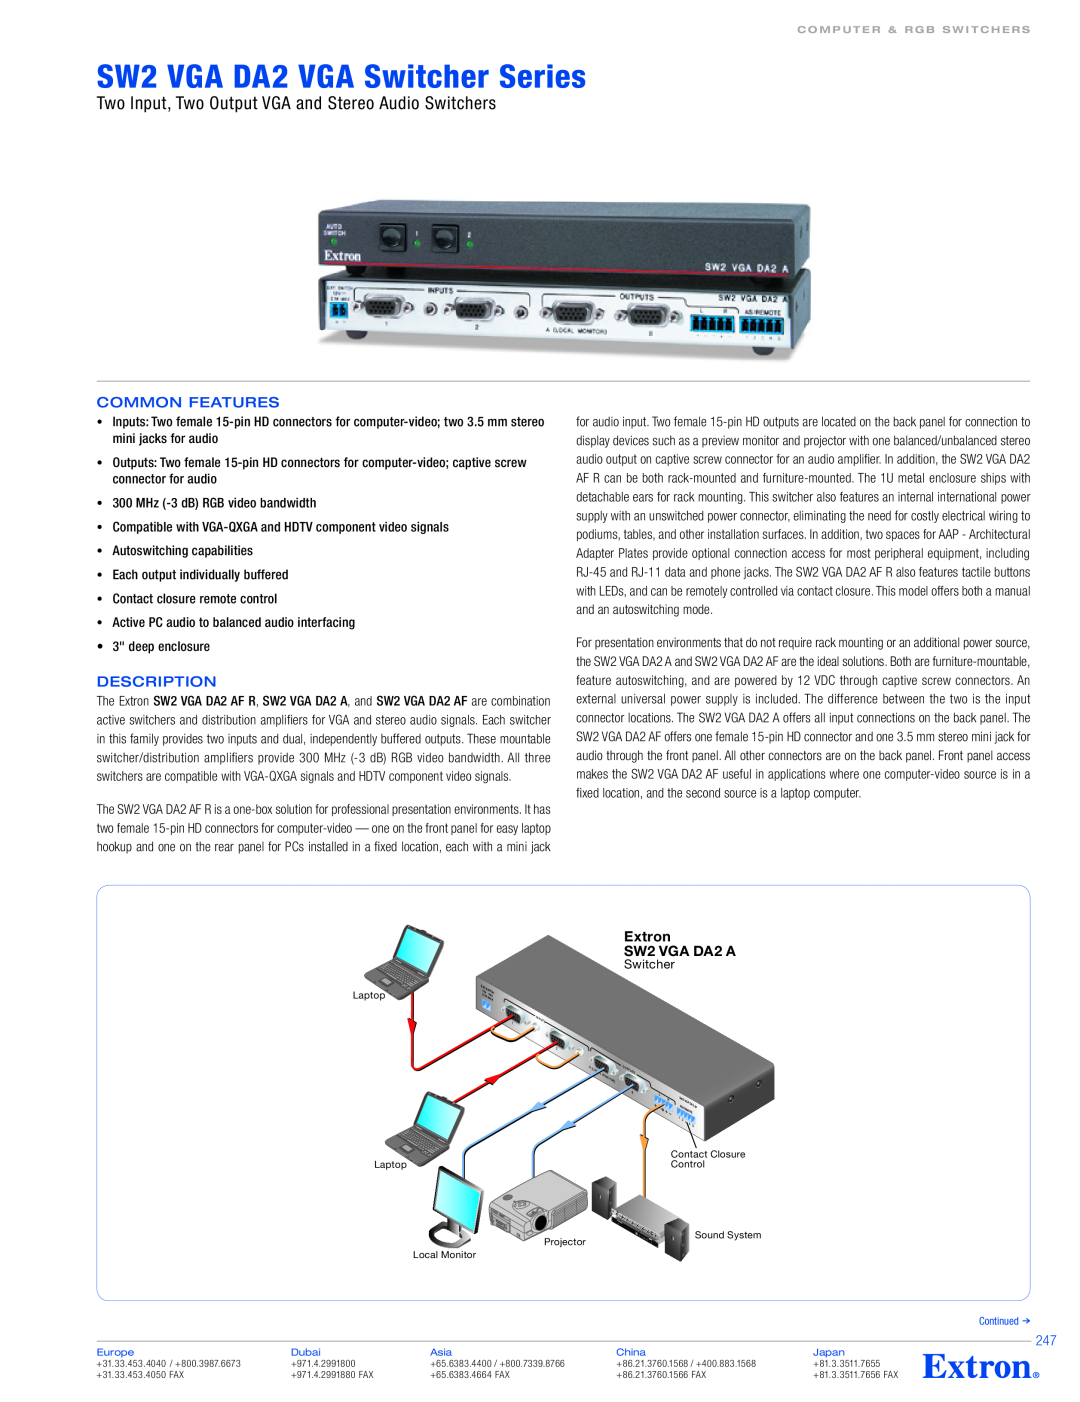 Extron electronic DA2 VGA Series specifications SW2 VGA DA2 VGA Switcher Series, Extron SW2 VGA DA2 A, Continued 